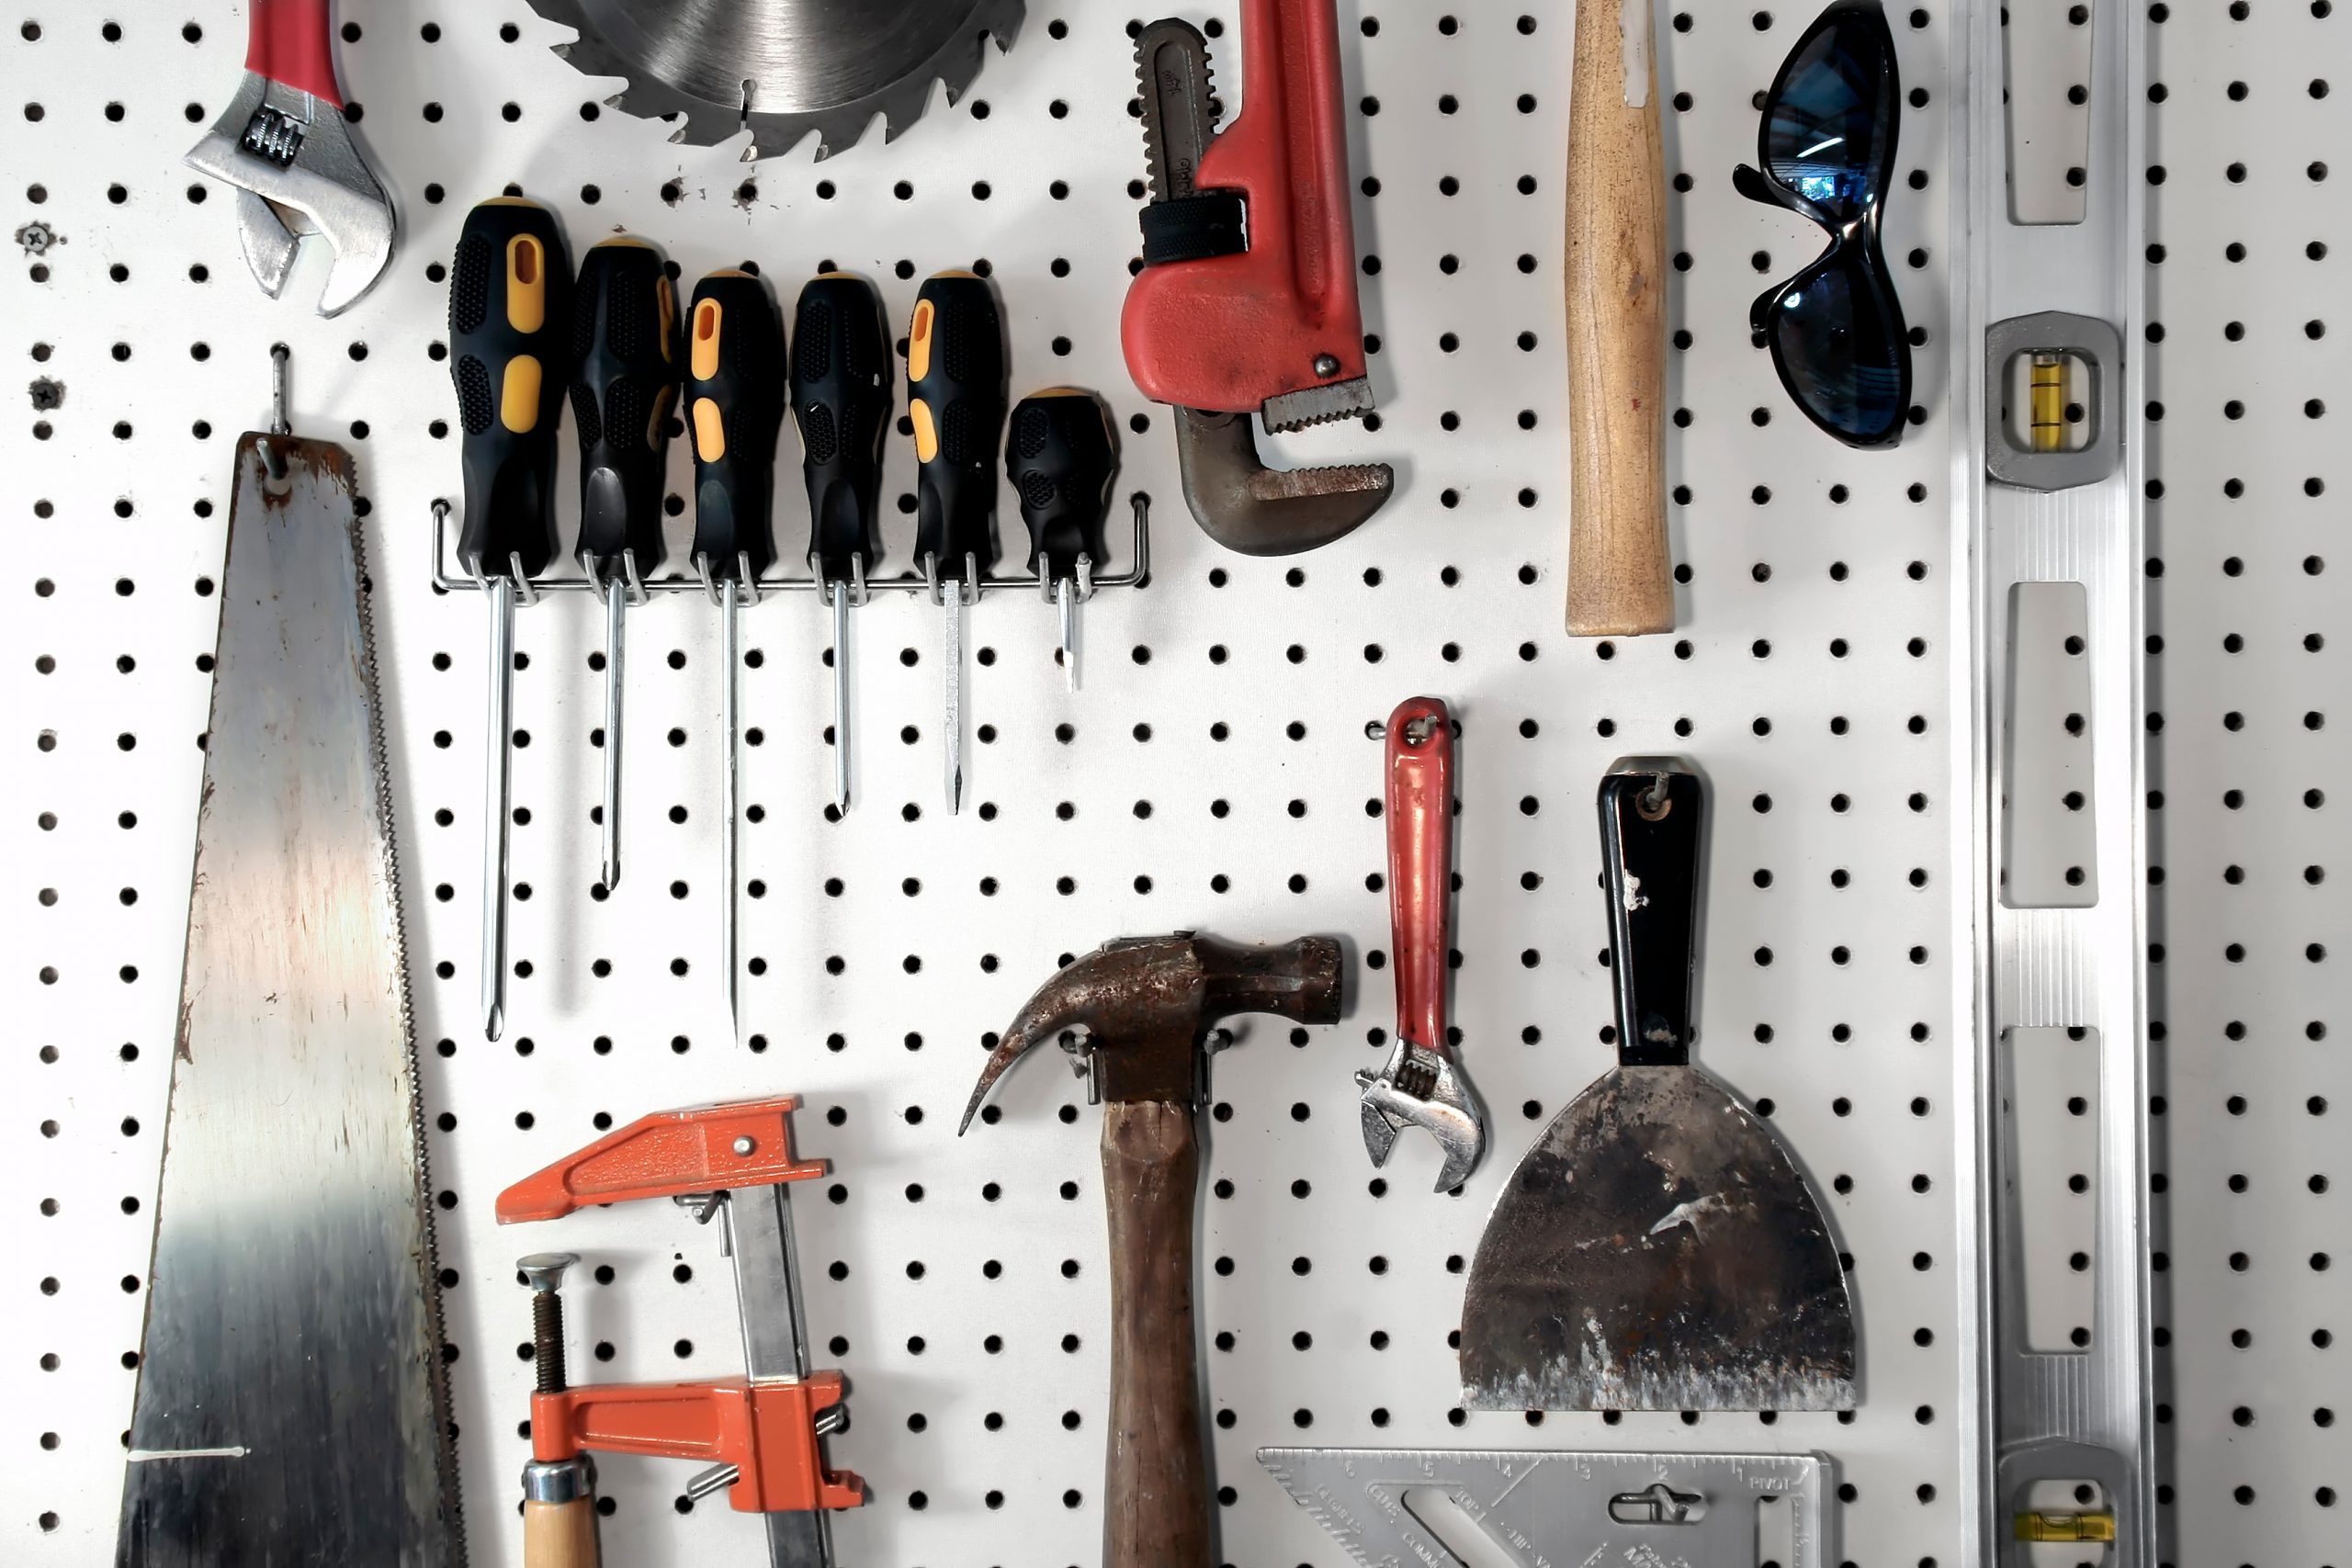 How to Organize a Garage on a Tight Budget